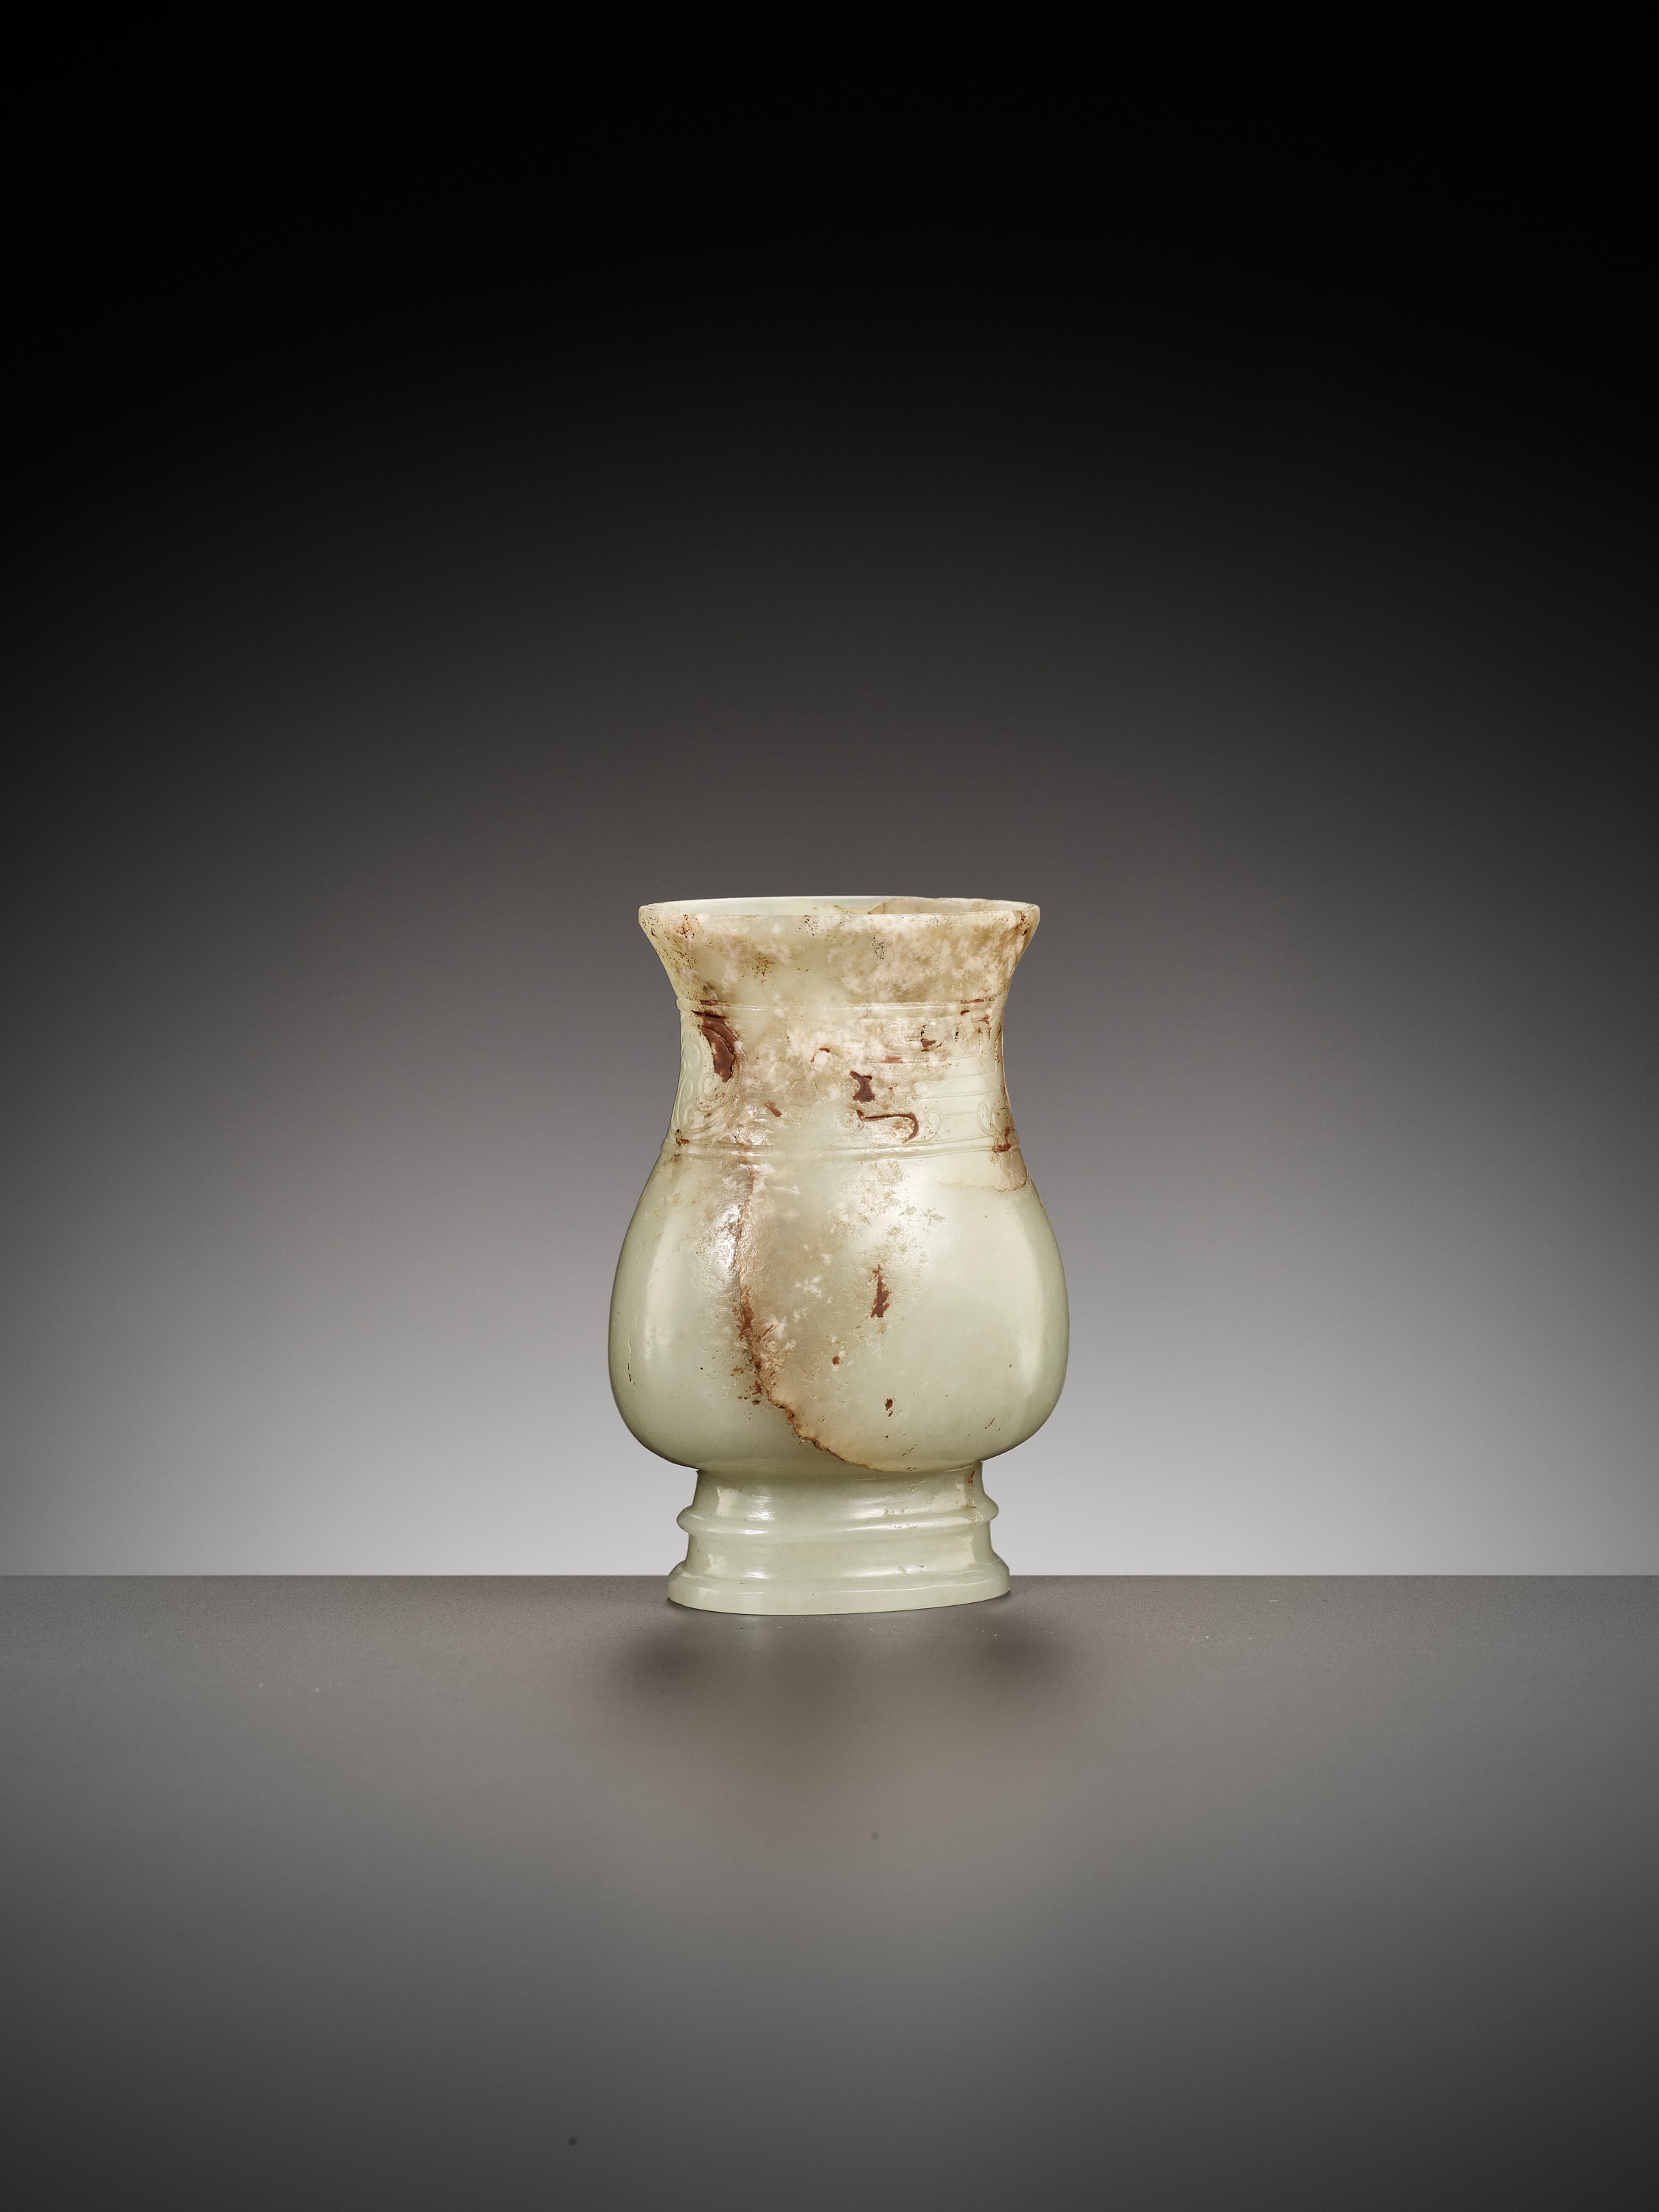 A RARE ARCHAISTIC 'SHANG BRONZE IMITATION' JADE VESSEL, ZHI, LATE SONG TO EARLY MING DYNASTY - Image 10 of 19